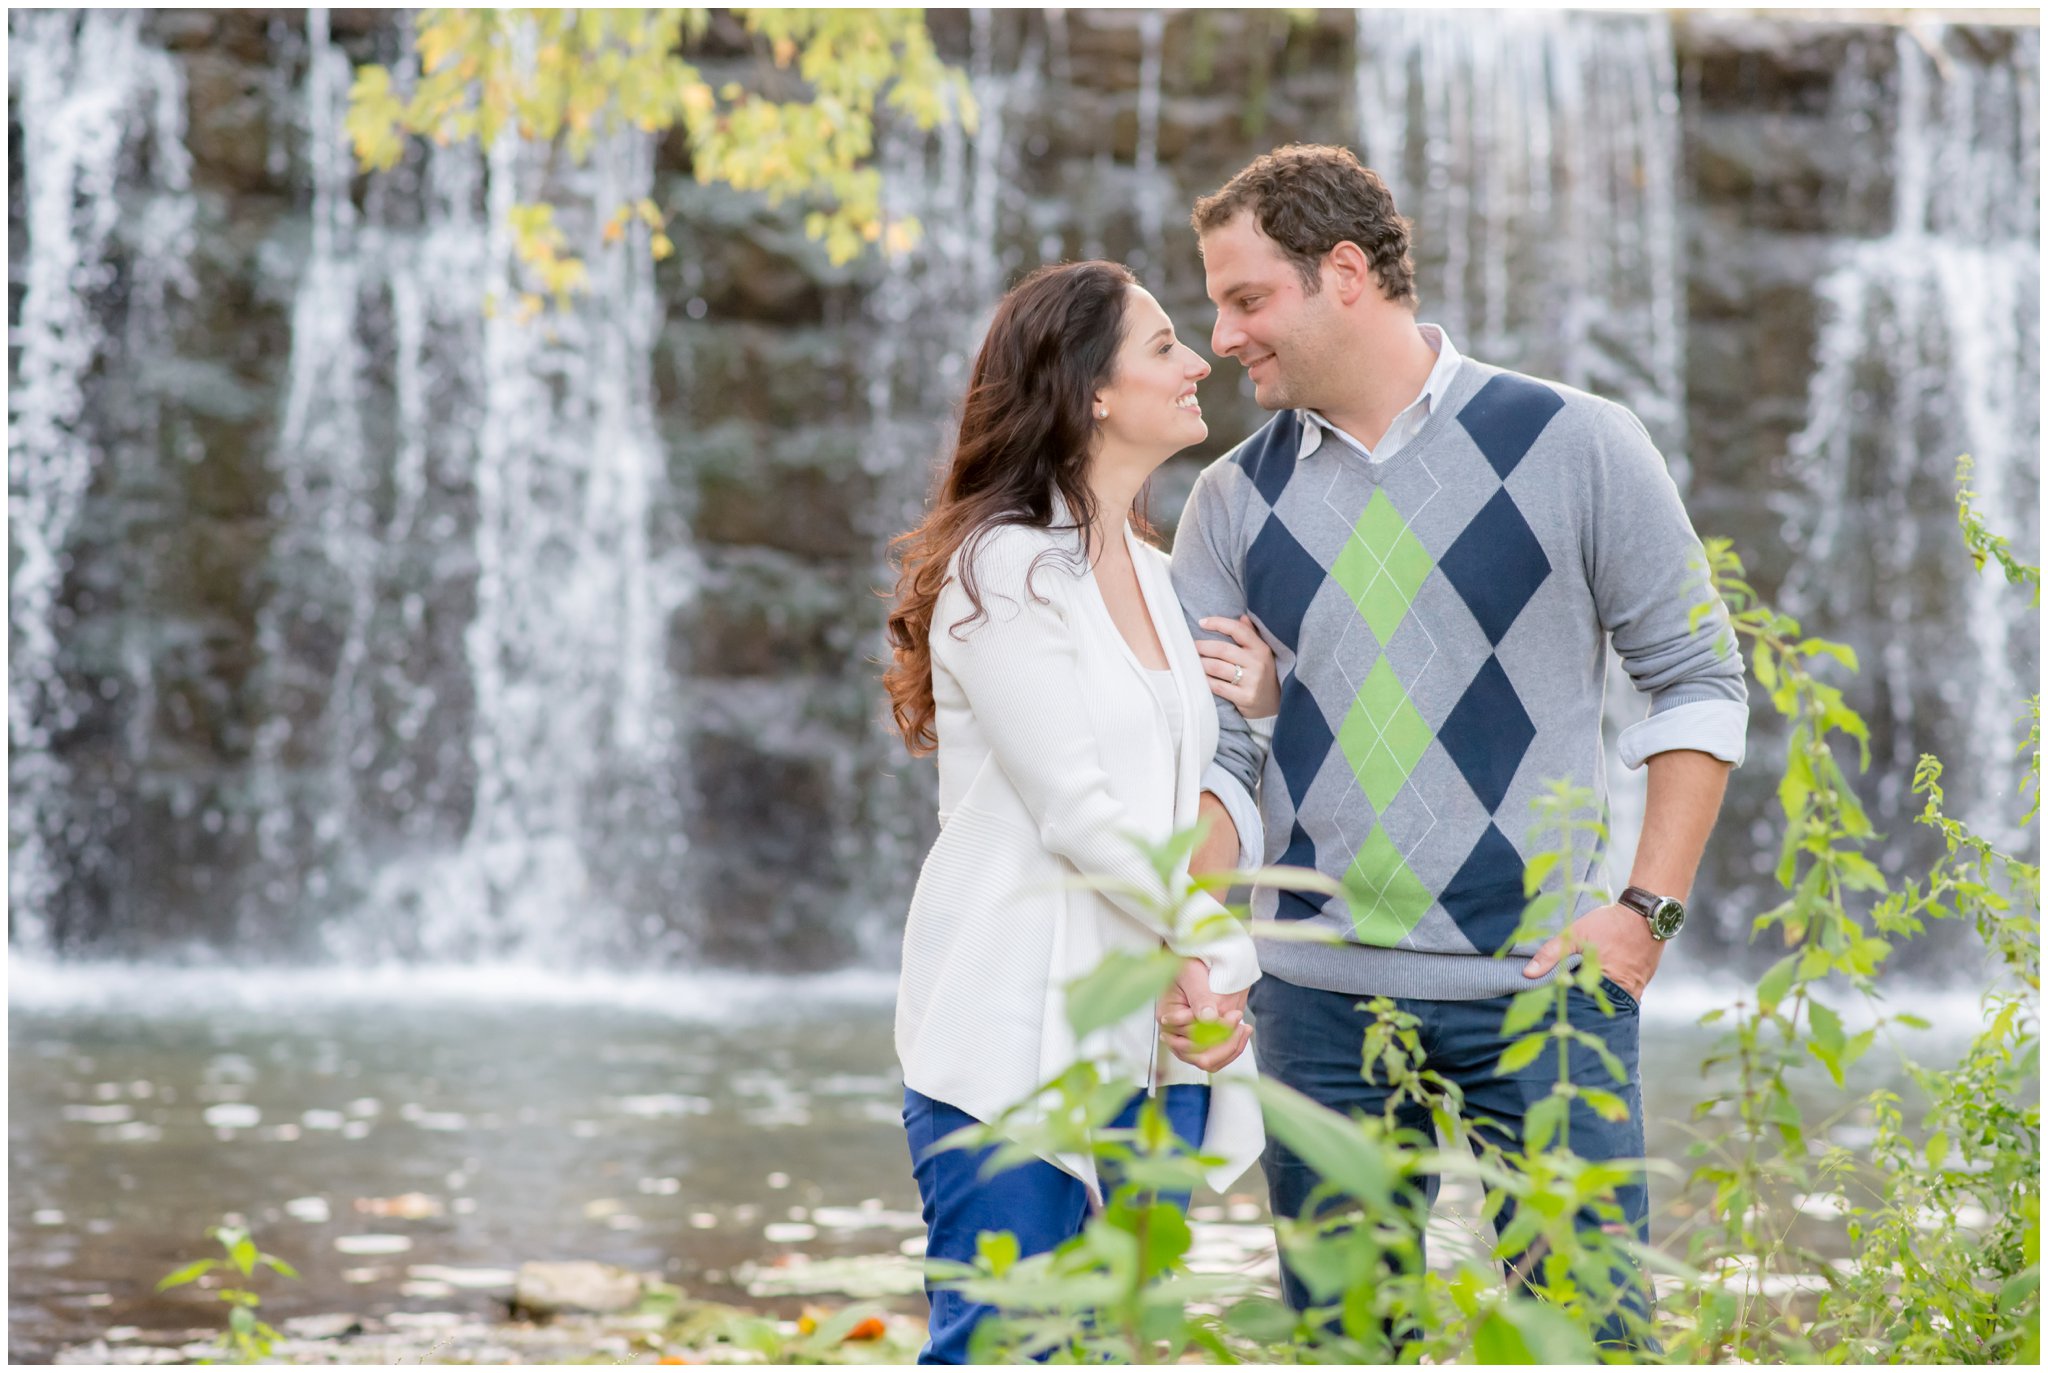 Laura Lee Photography_ Best of 2015 Engagements_0043